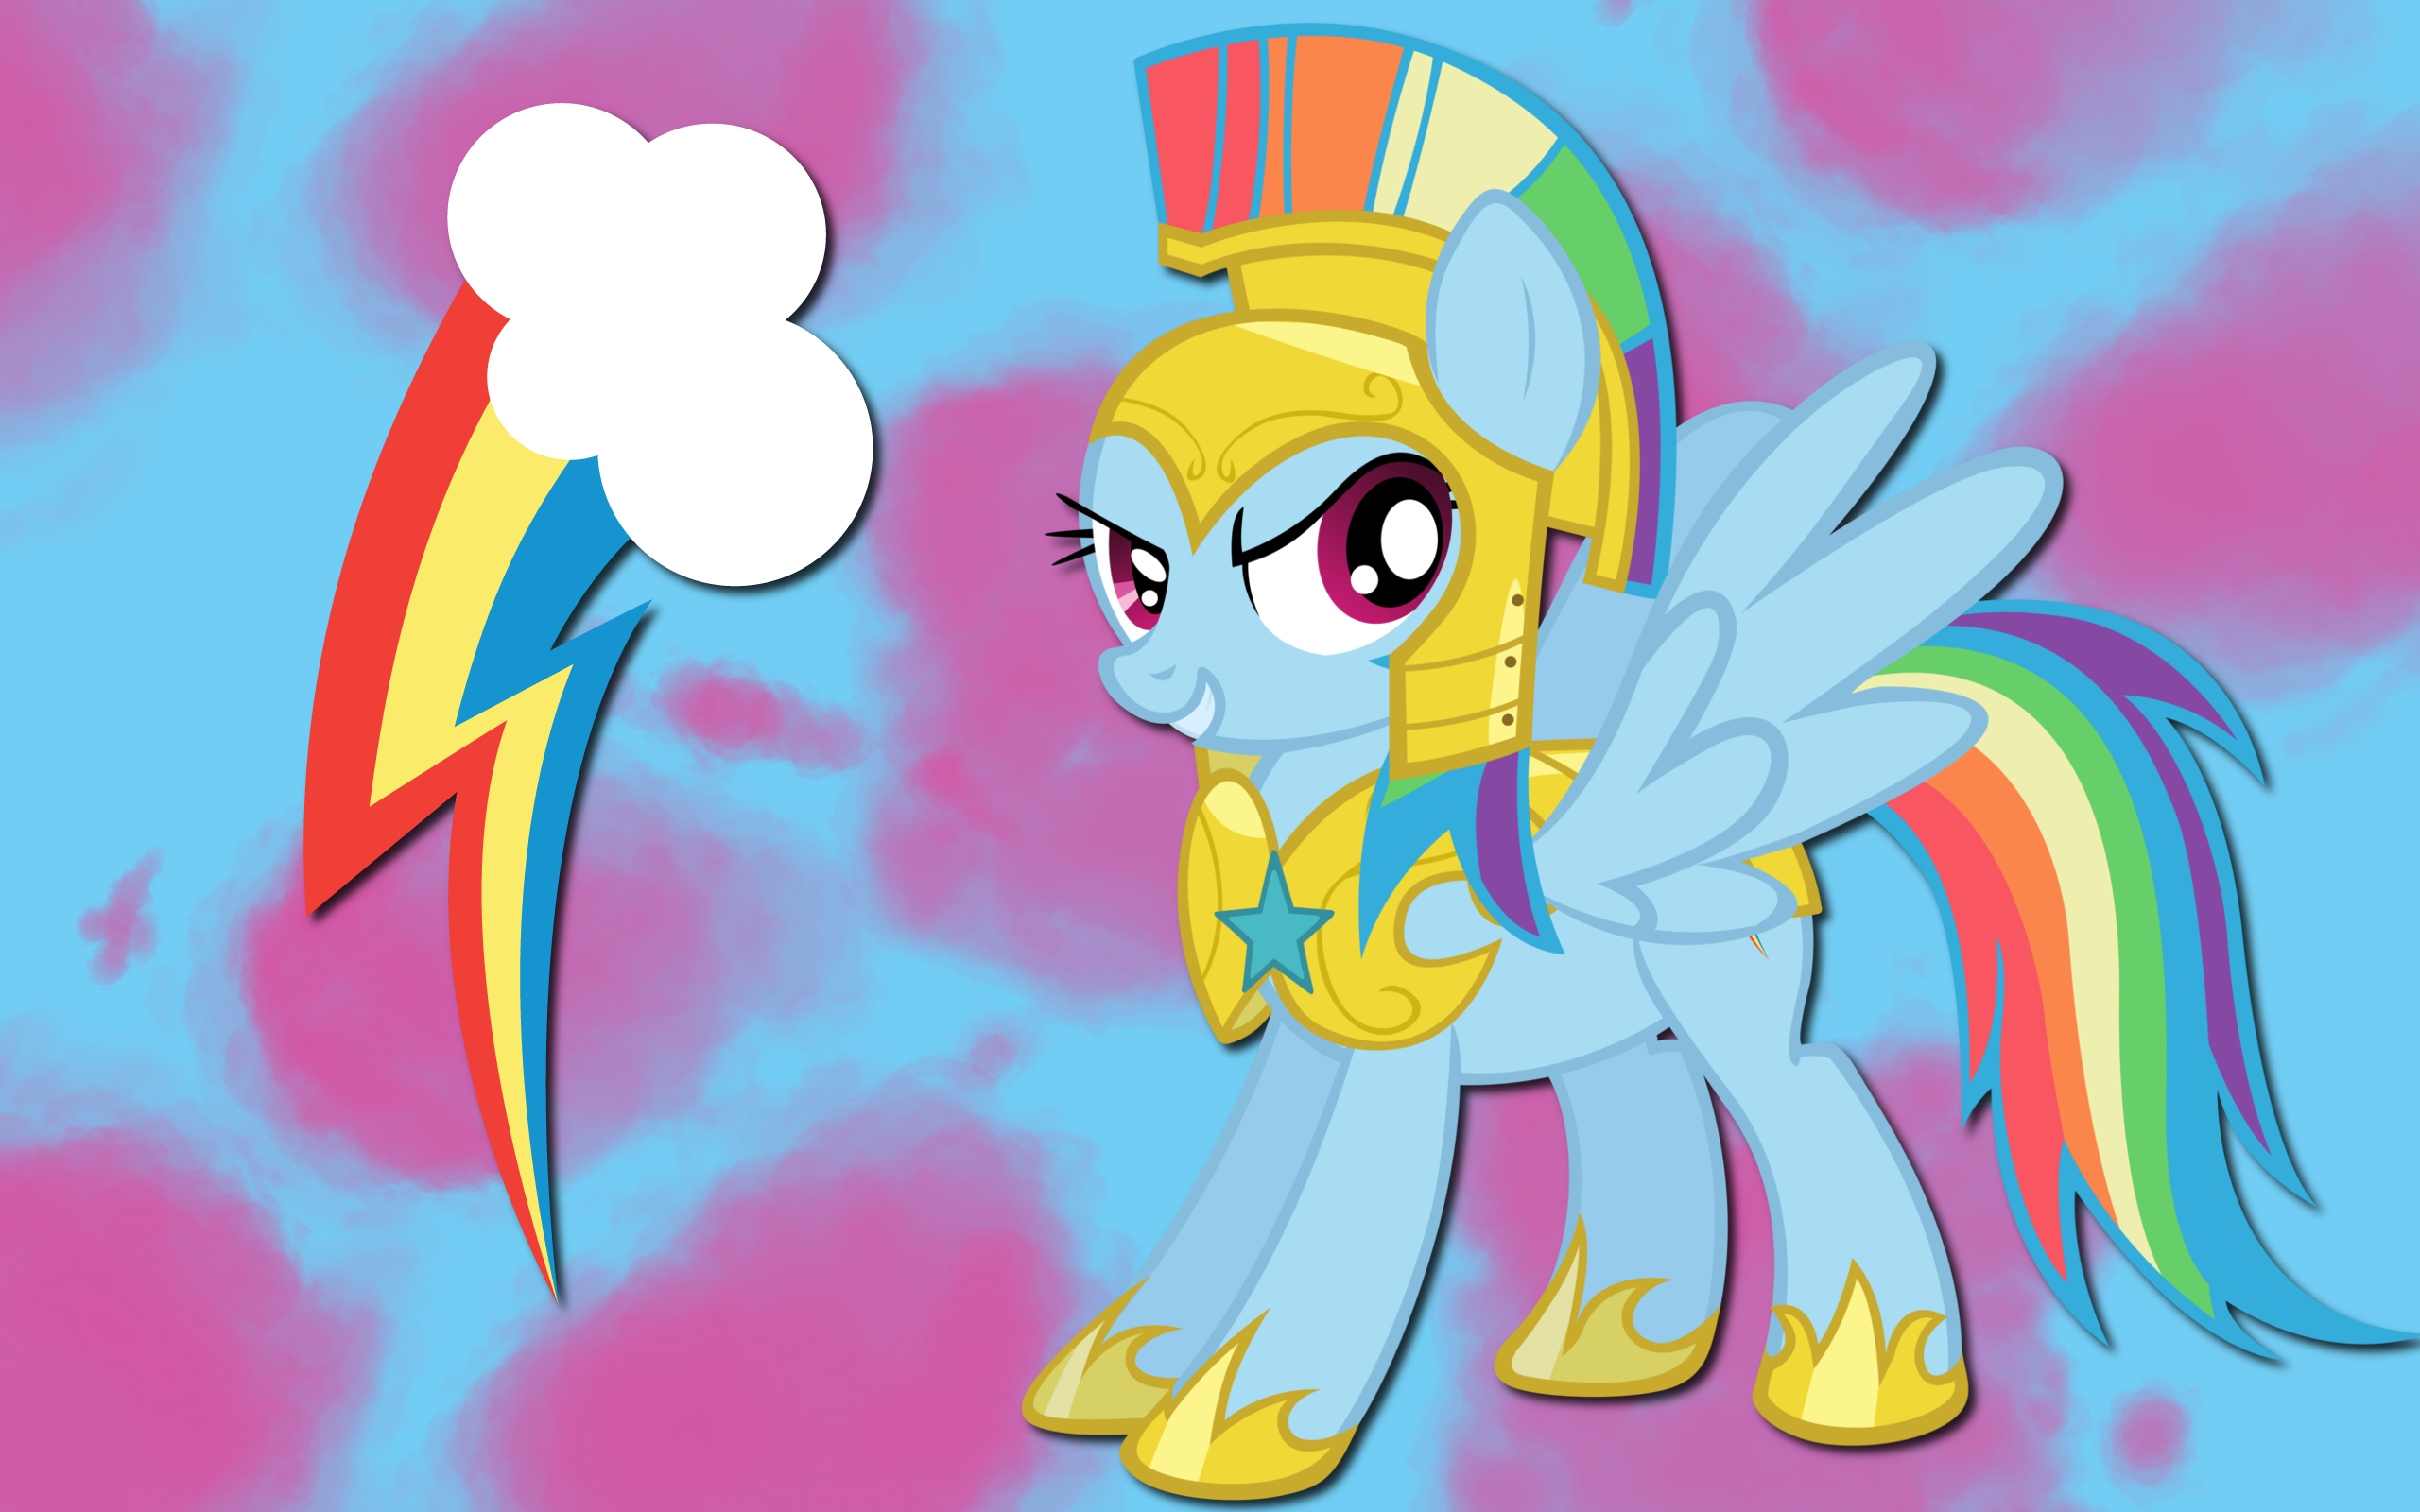 Guard Dashie WP by AliceHumanSacrifice0, ooklah and Spaceponies